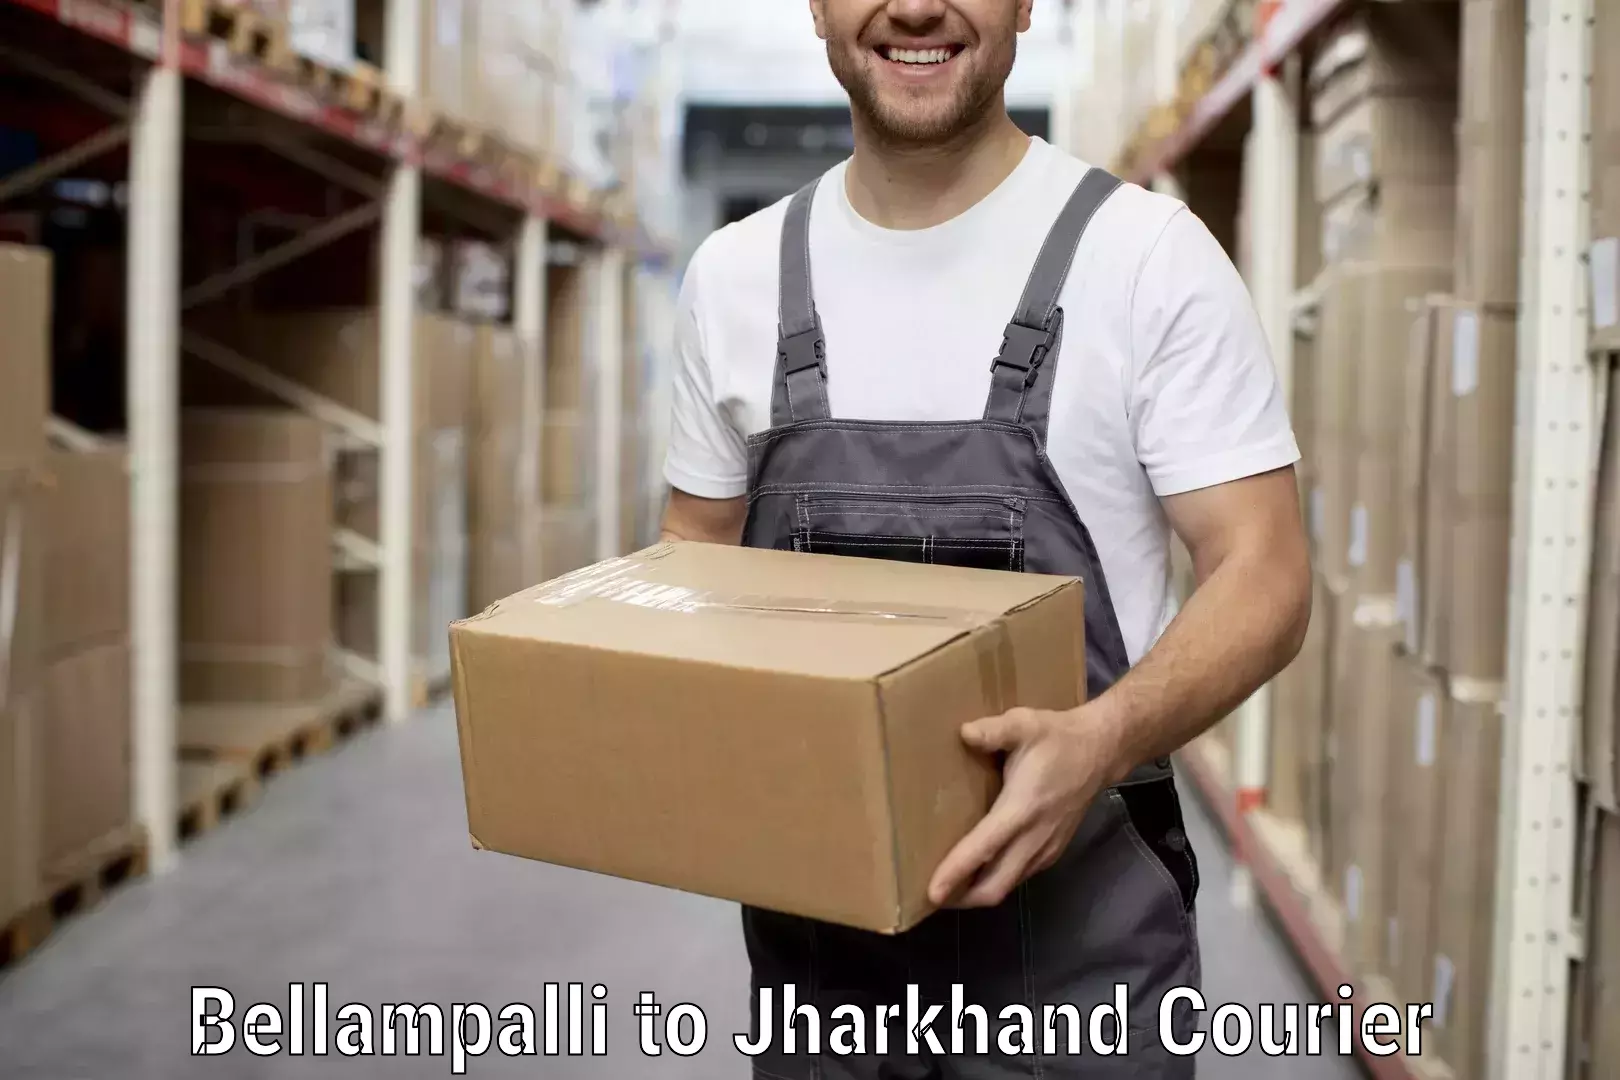 Furniture moving specialists Bellampalli to Peterbar